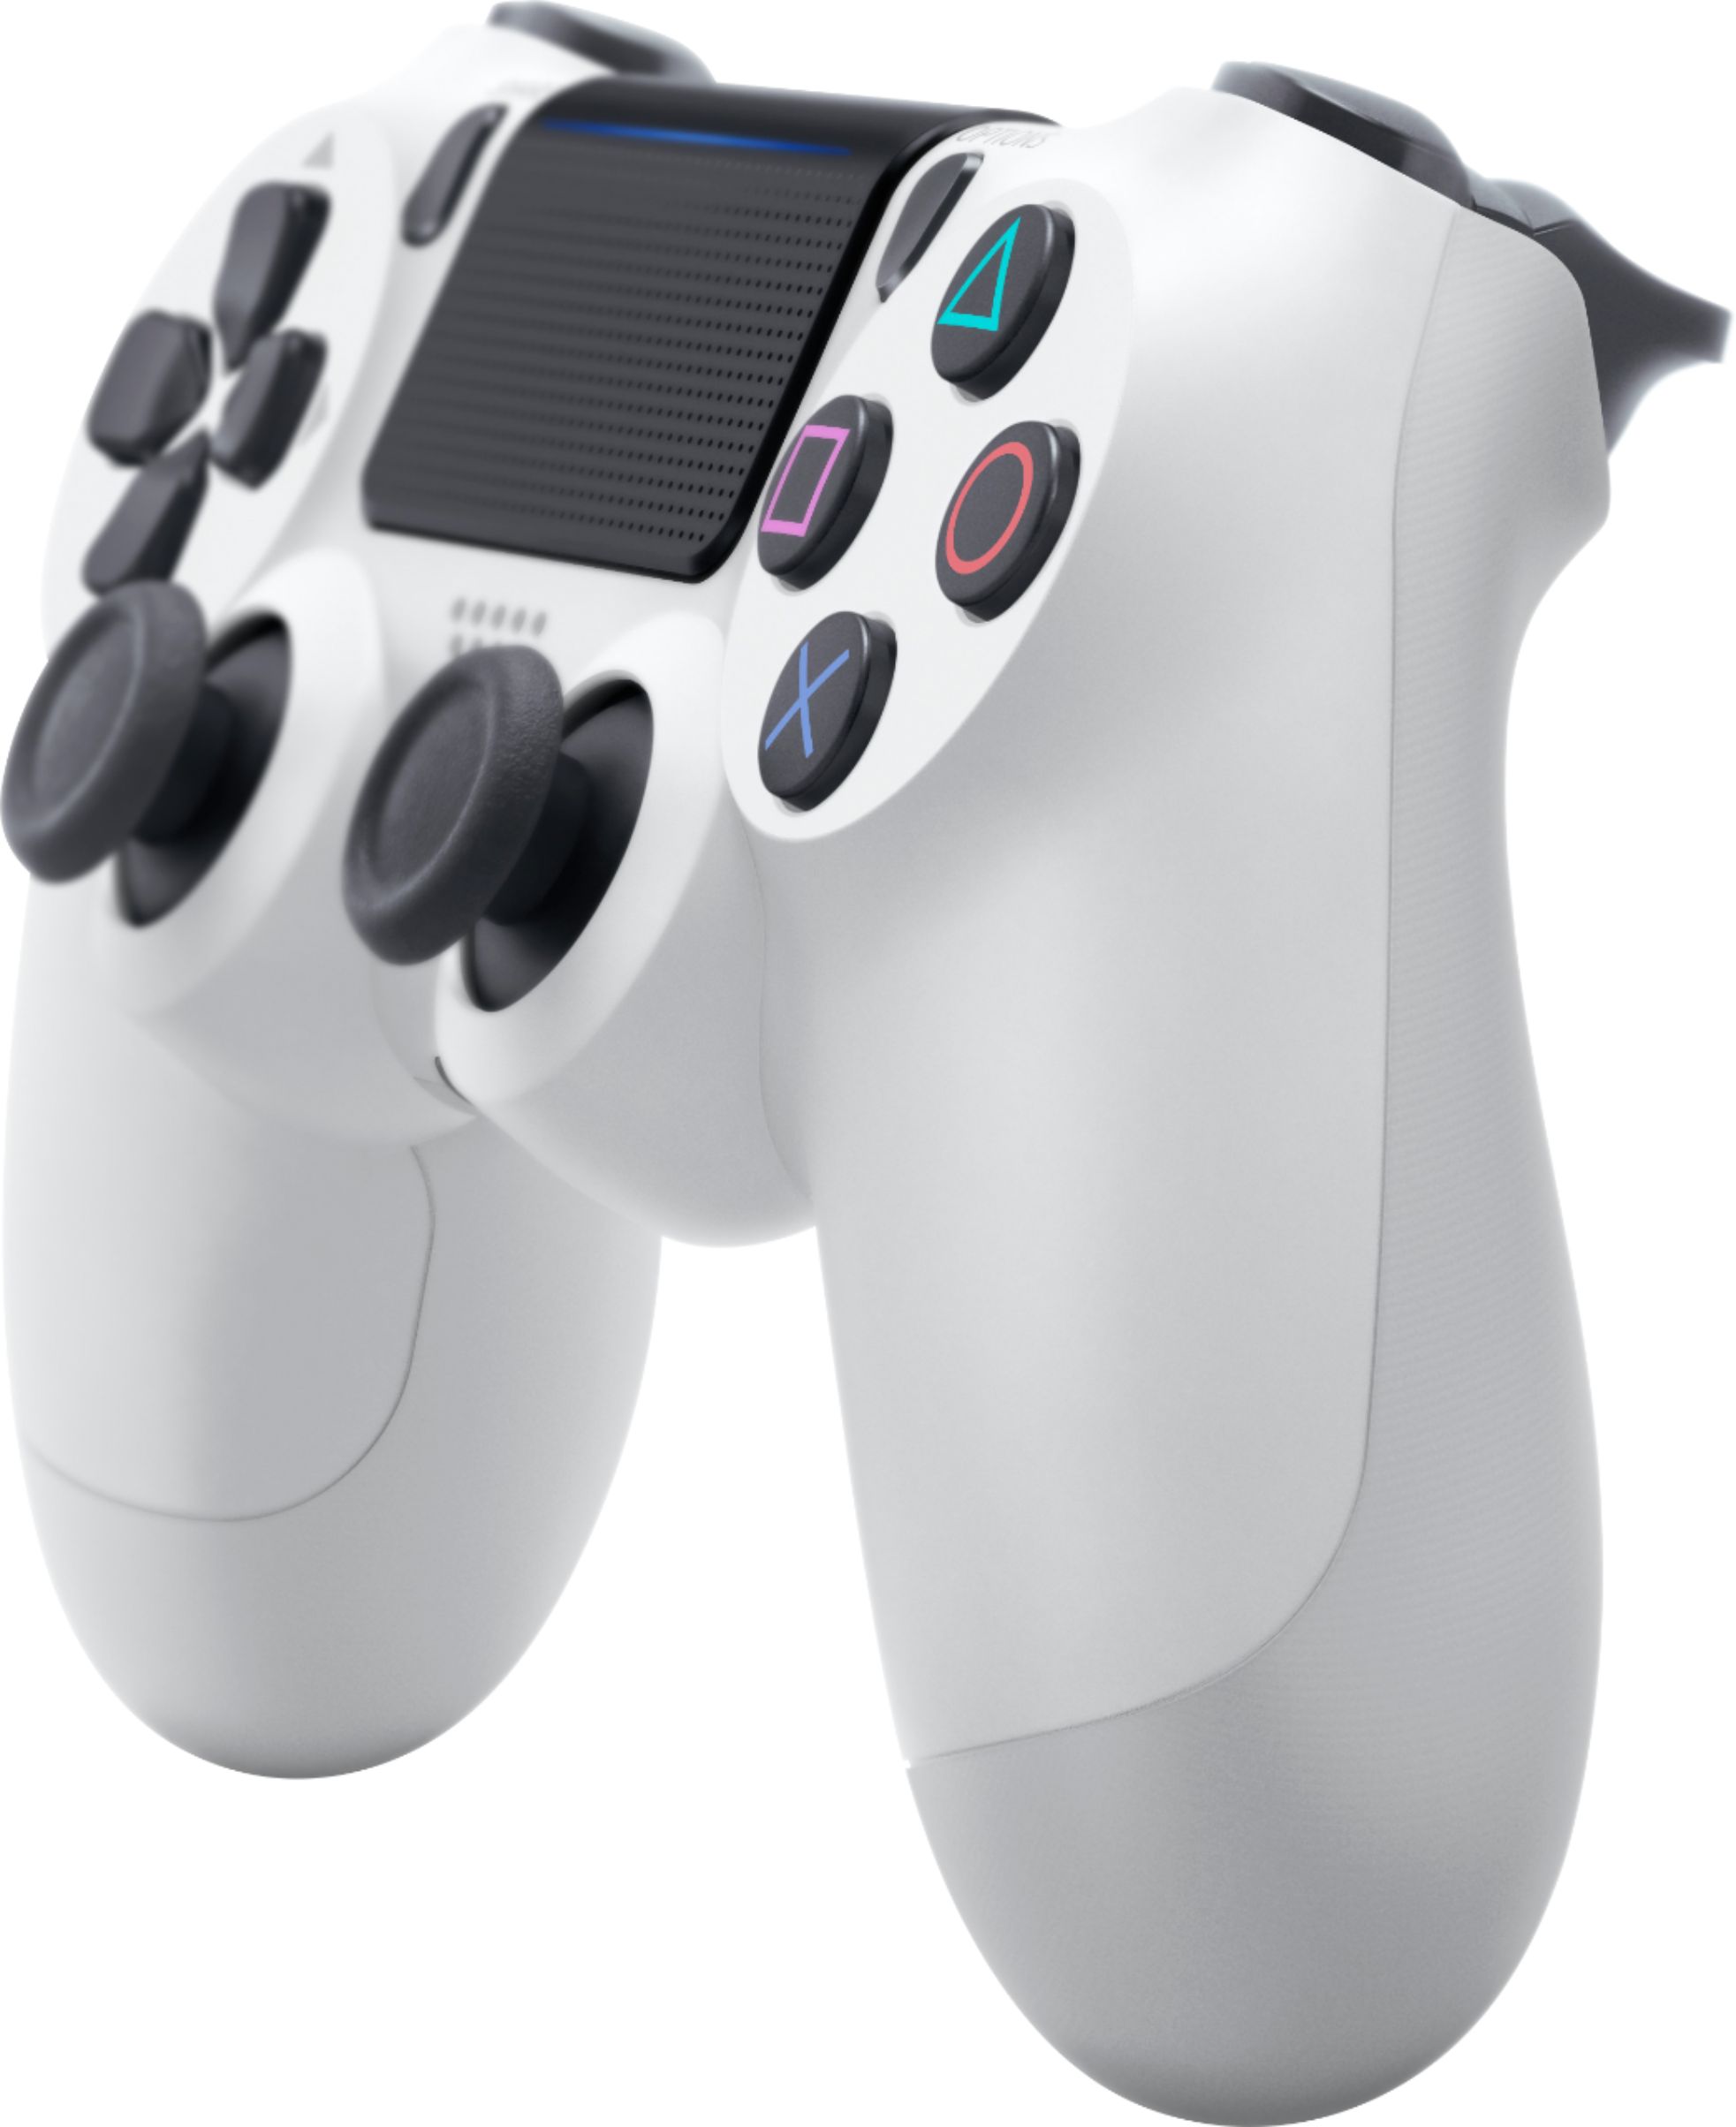 Geek Squad Certified Refurbished DualShock 4 Wireless Controller for Sony PlayStation  4 Glacier White 3004376 - Best Buy